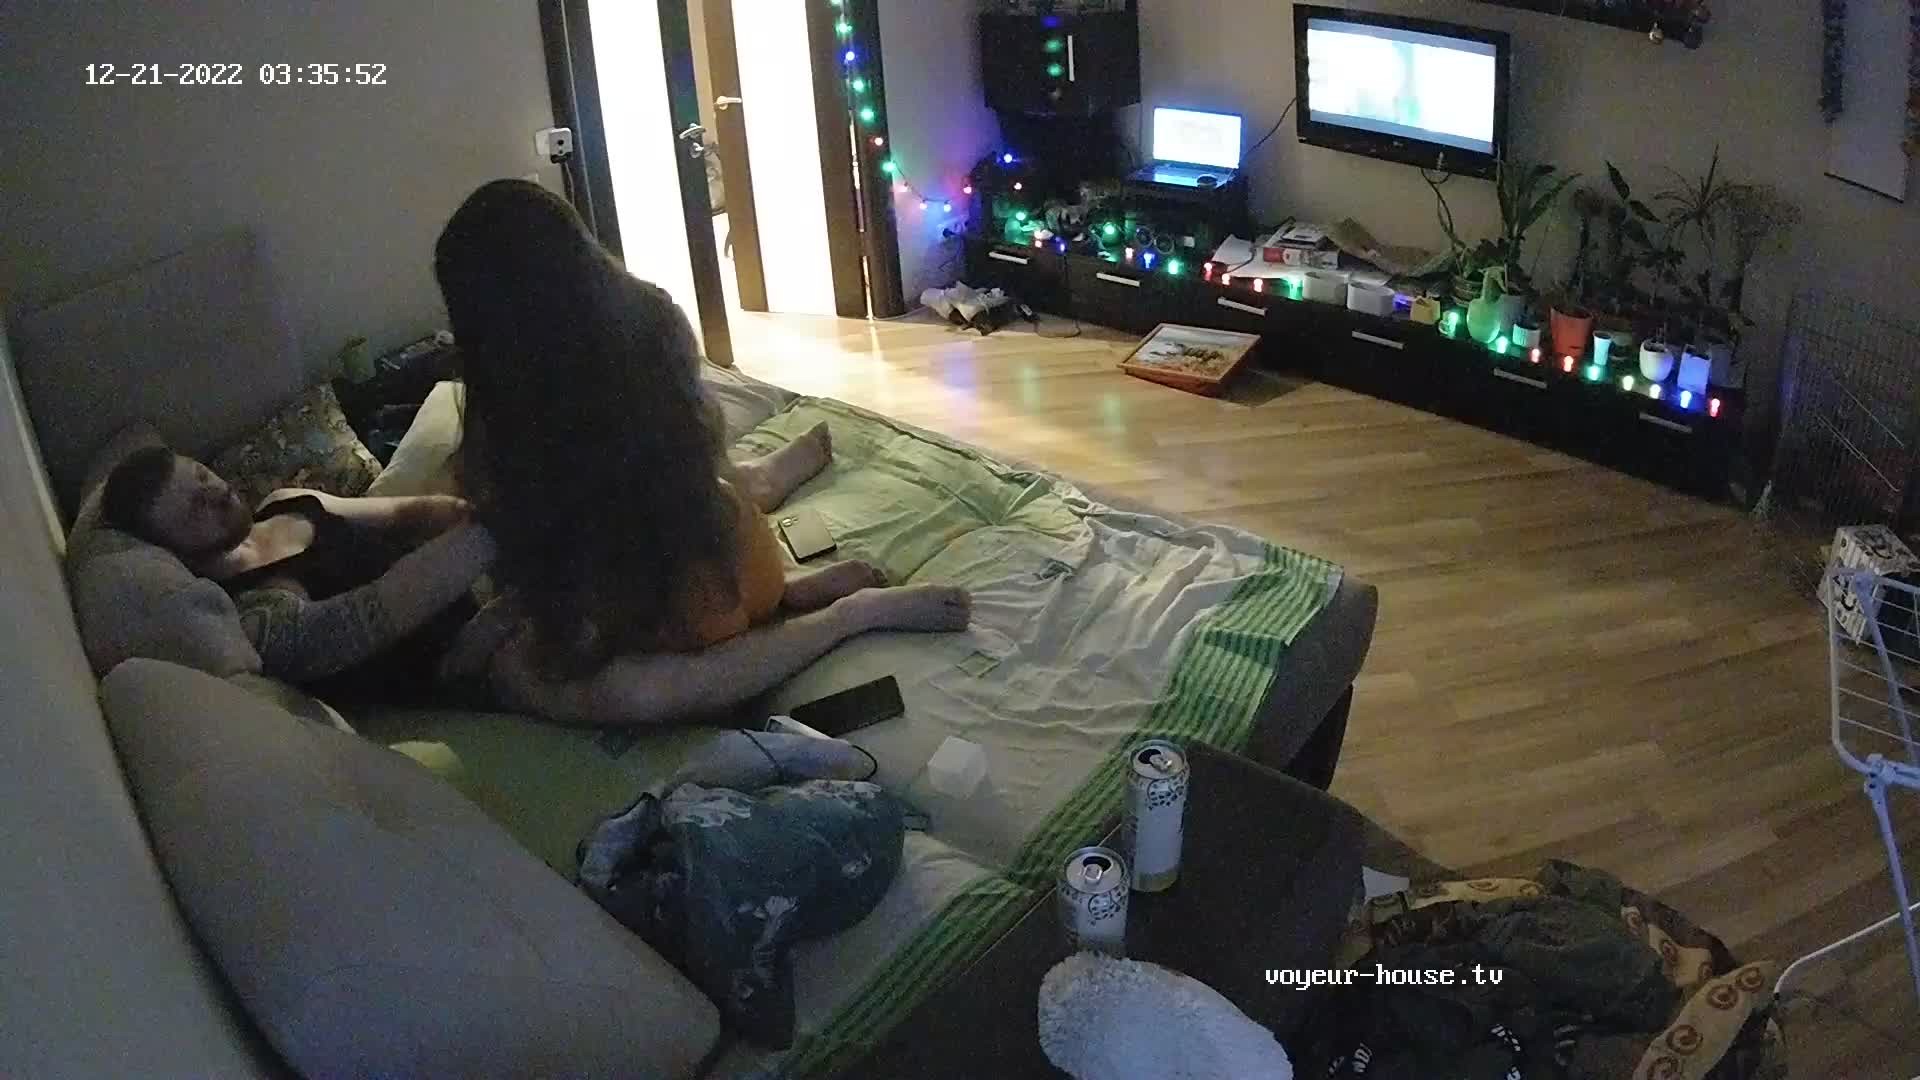 Ariela helps the guest guy out with his self-stimulation | 2022-12-21